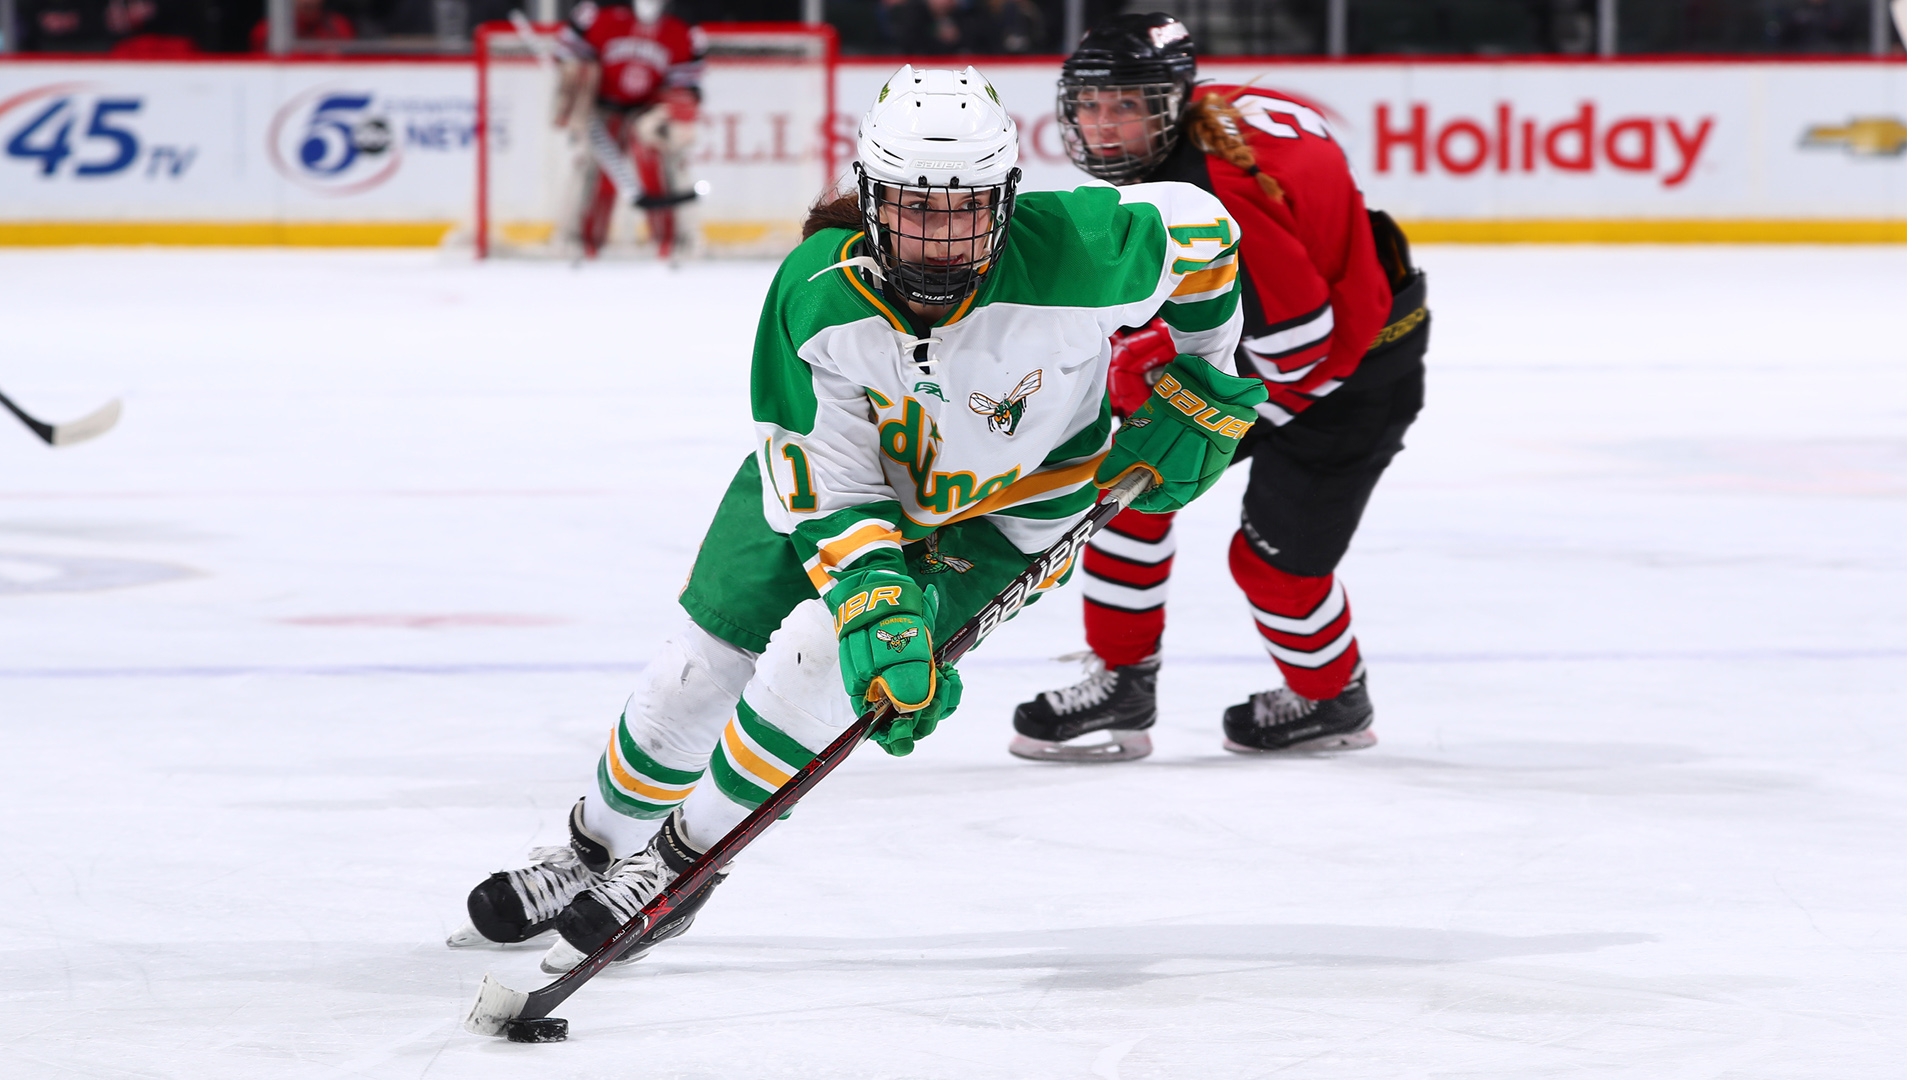 The 2021-2022 MSHSL Girls' Hockey State Tournament at Xcel Energy Center & TRIA Rink will take place Feb. 23-26, 2022. Click the link for more information. 